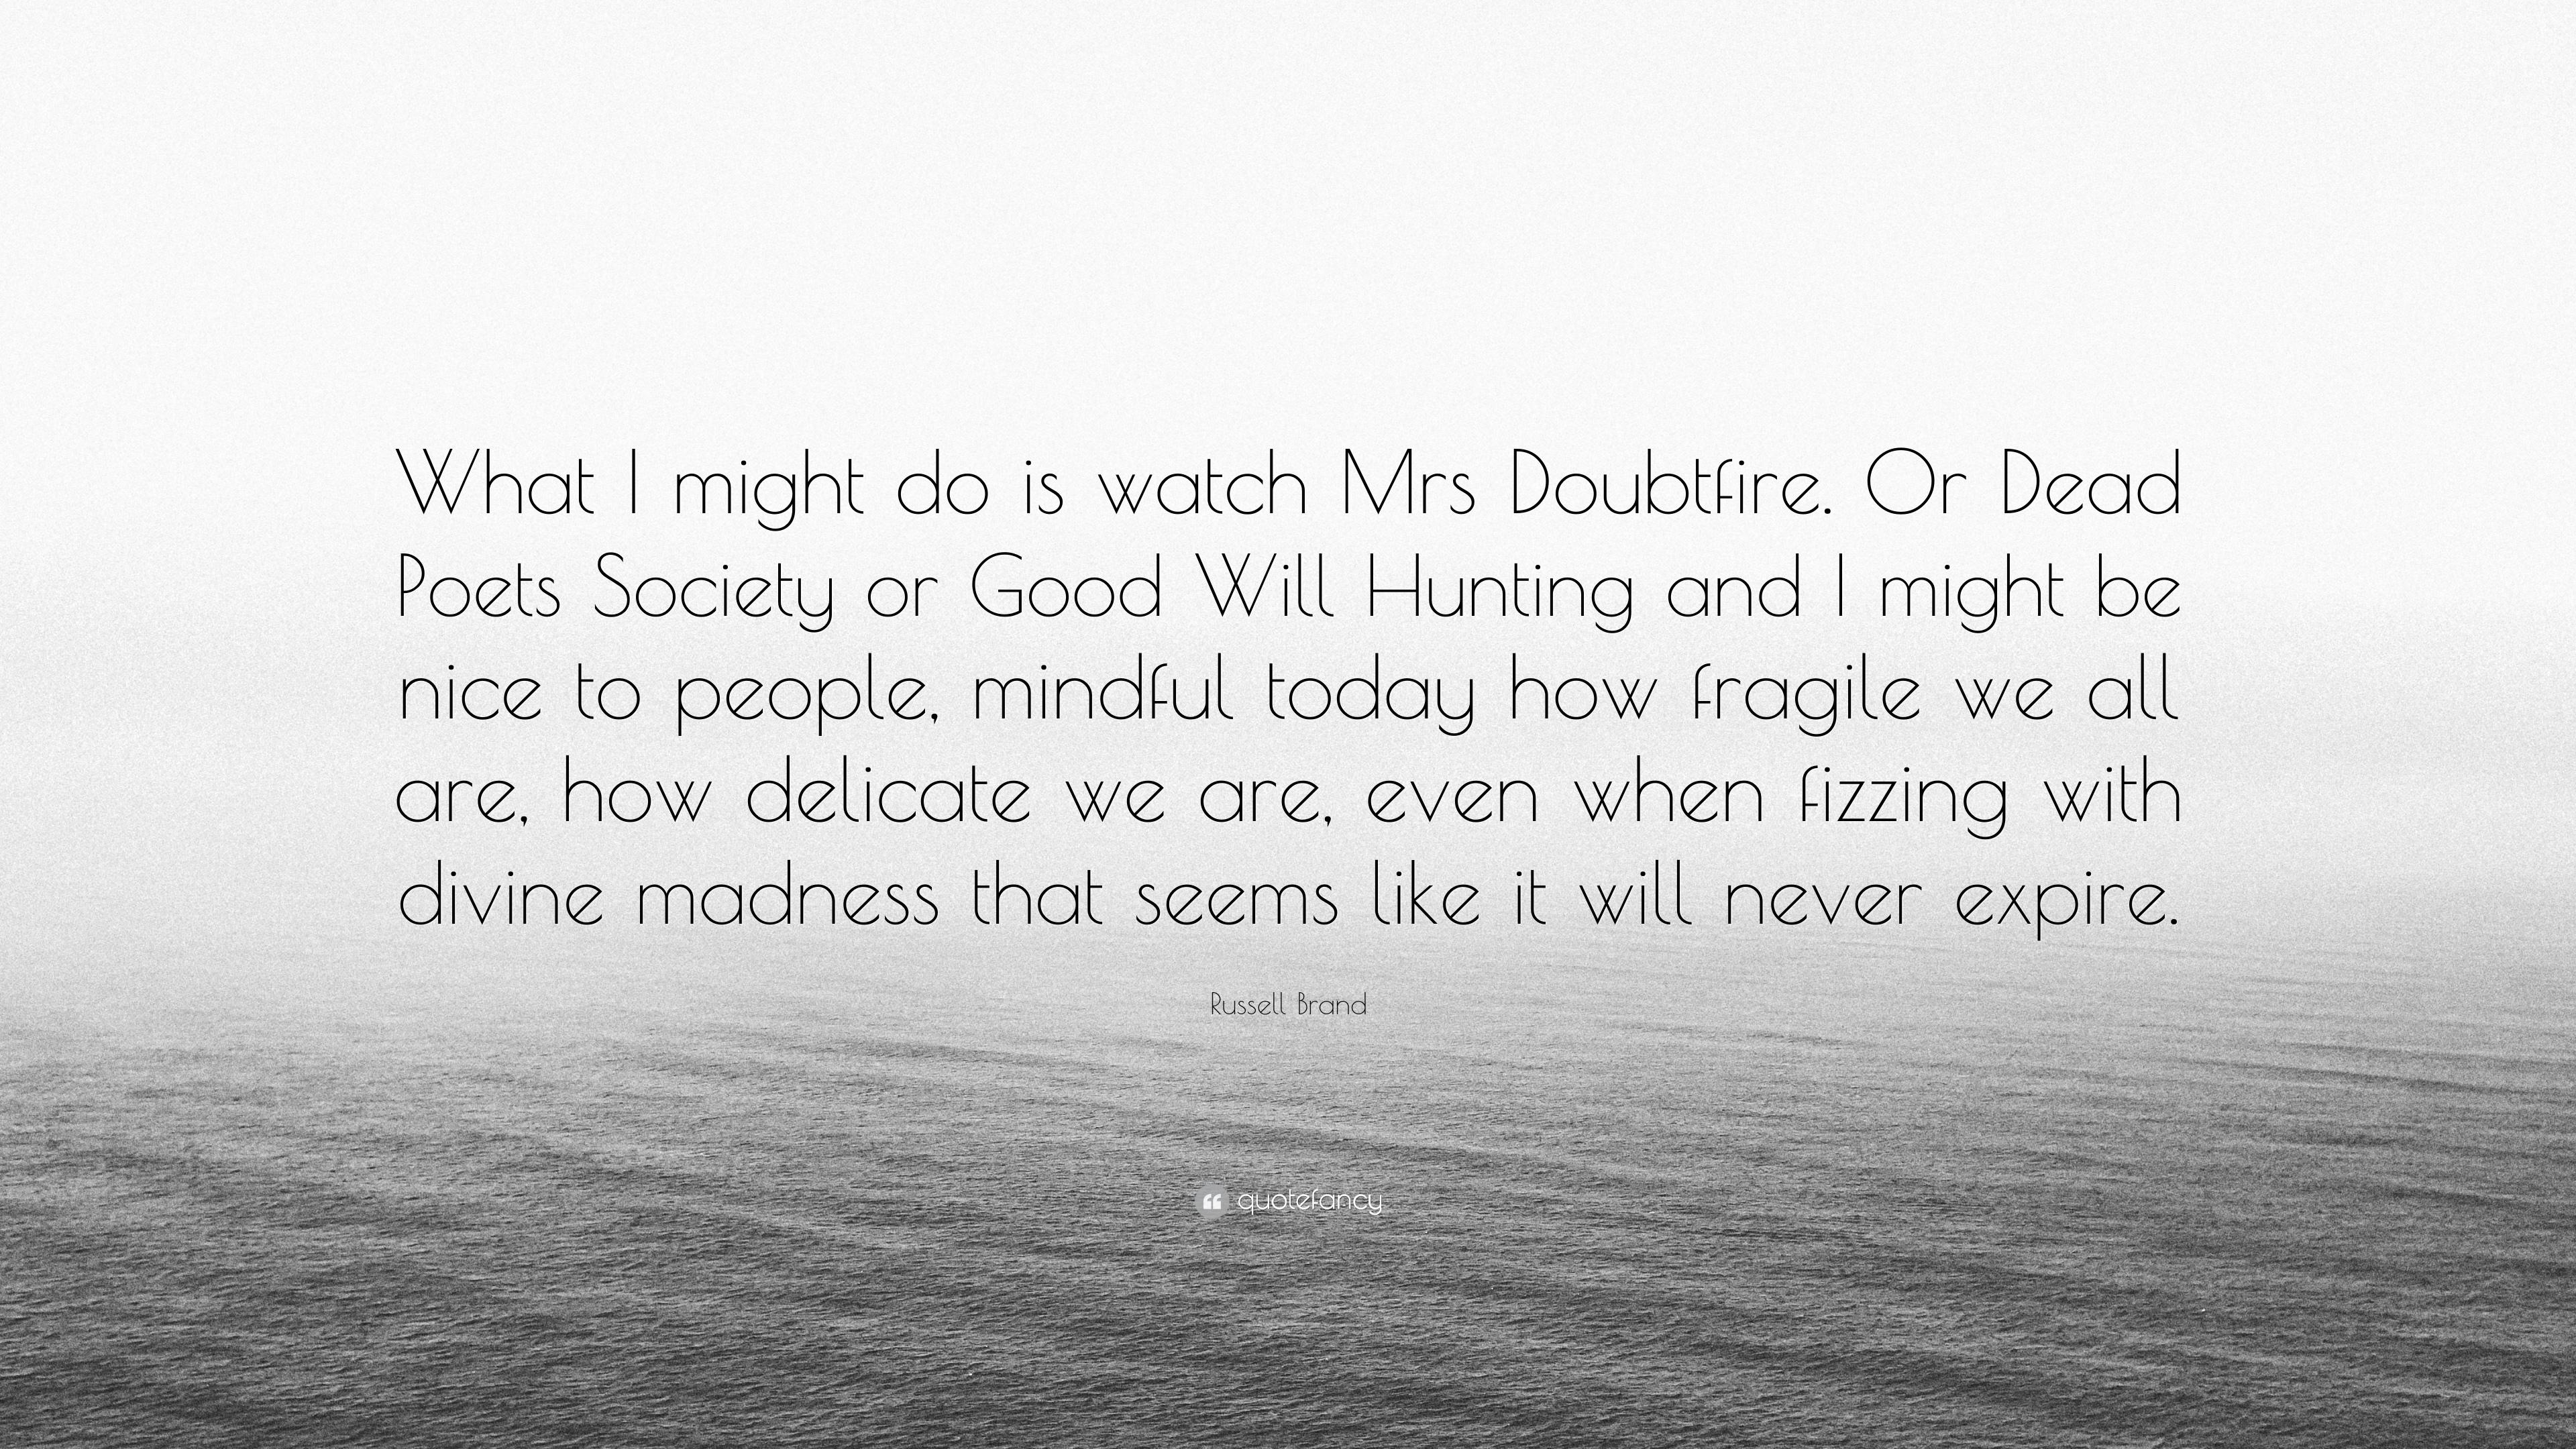 Russell Brand Quote: “What I might do is watch Mrs Doubtfire